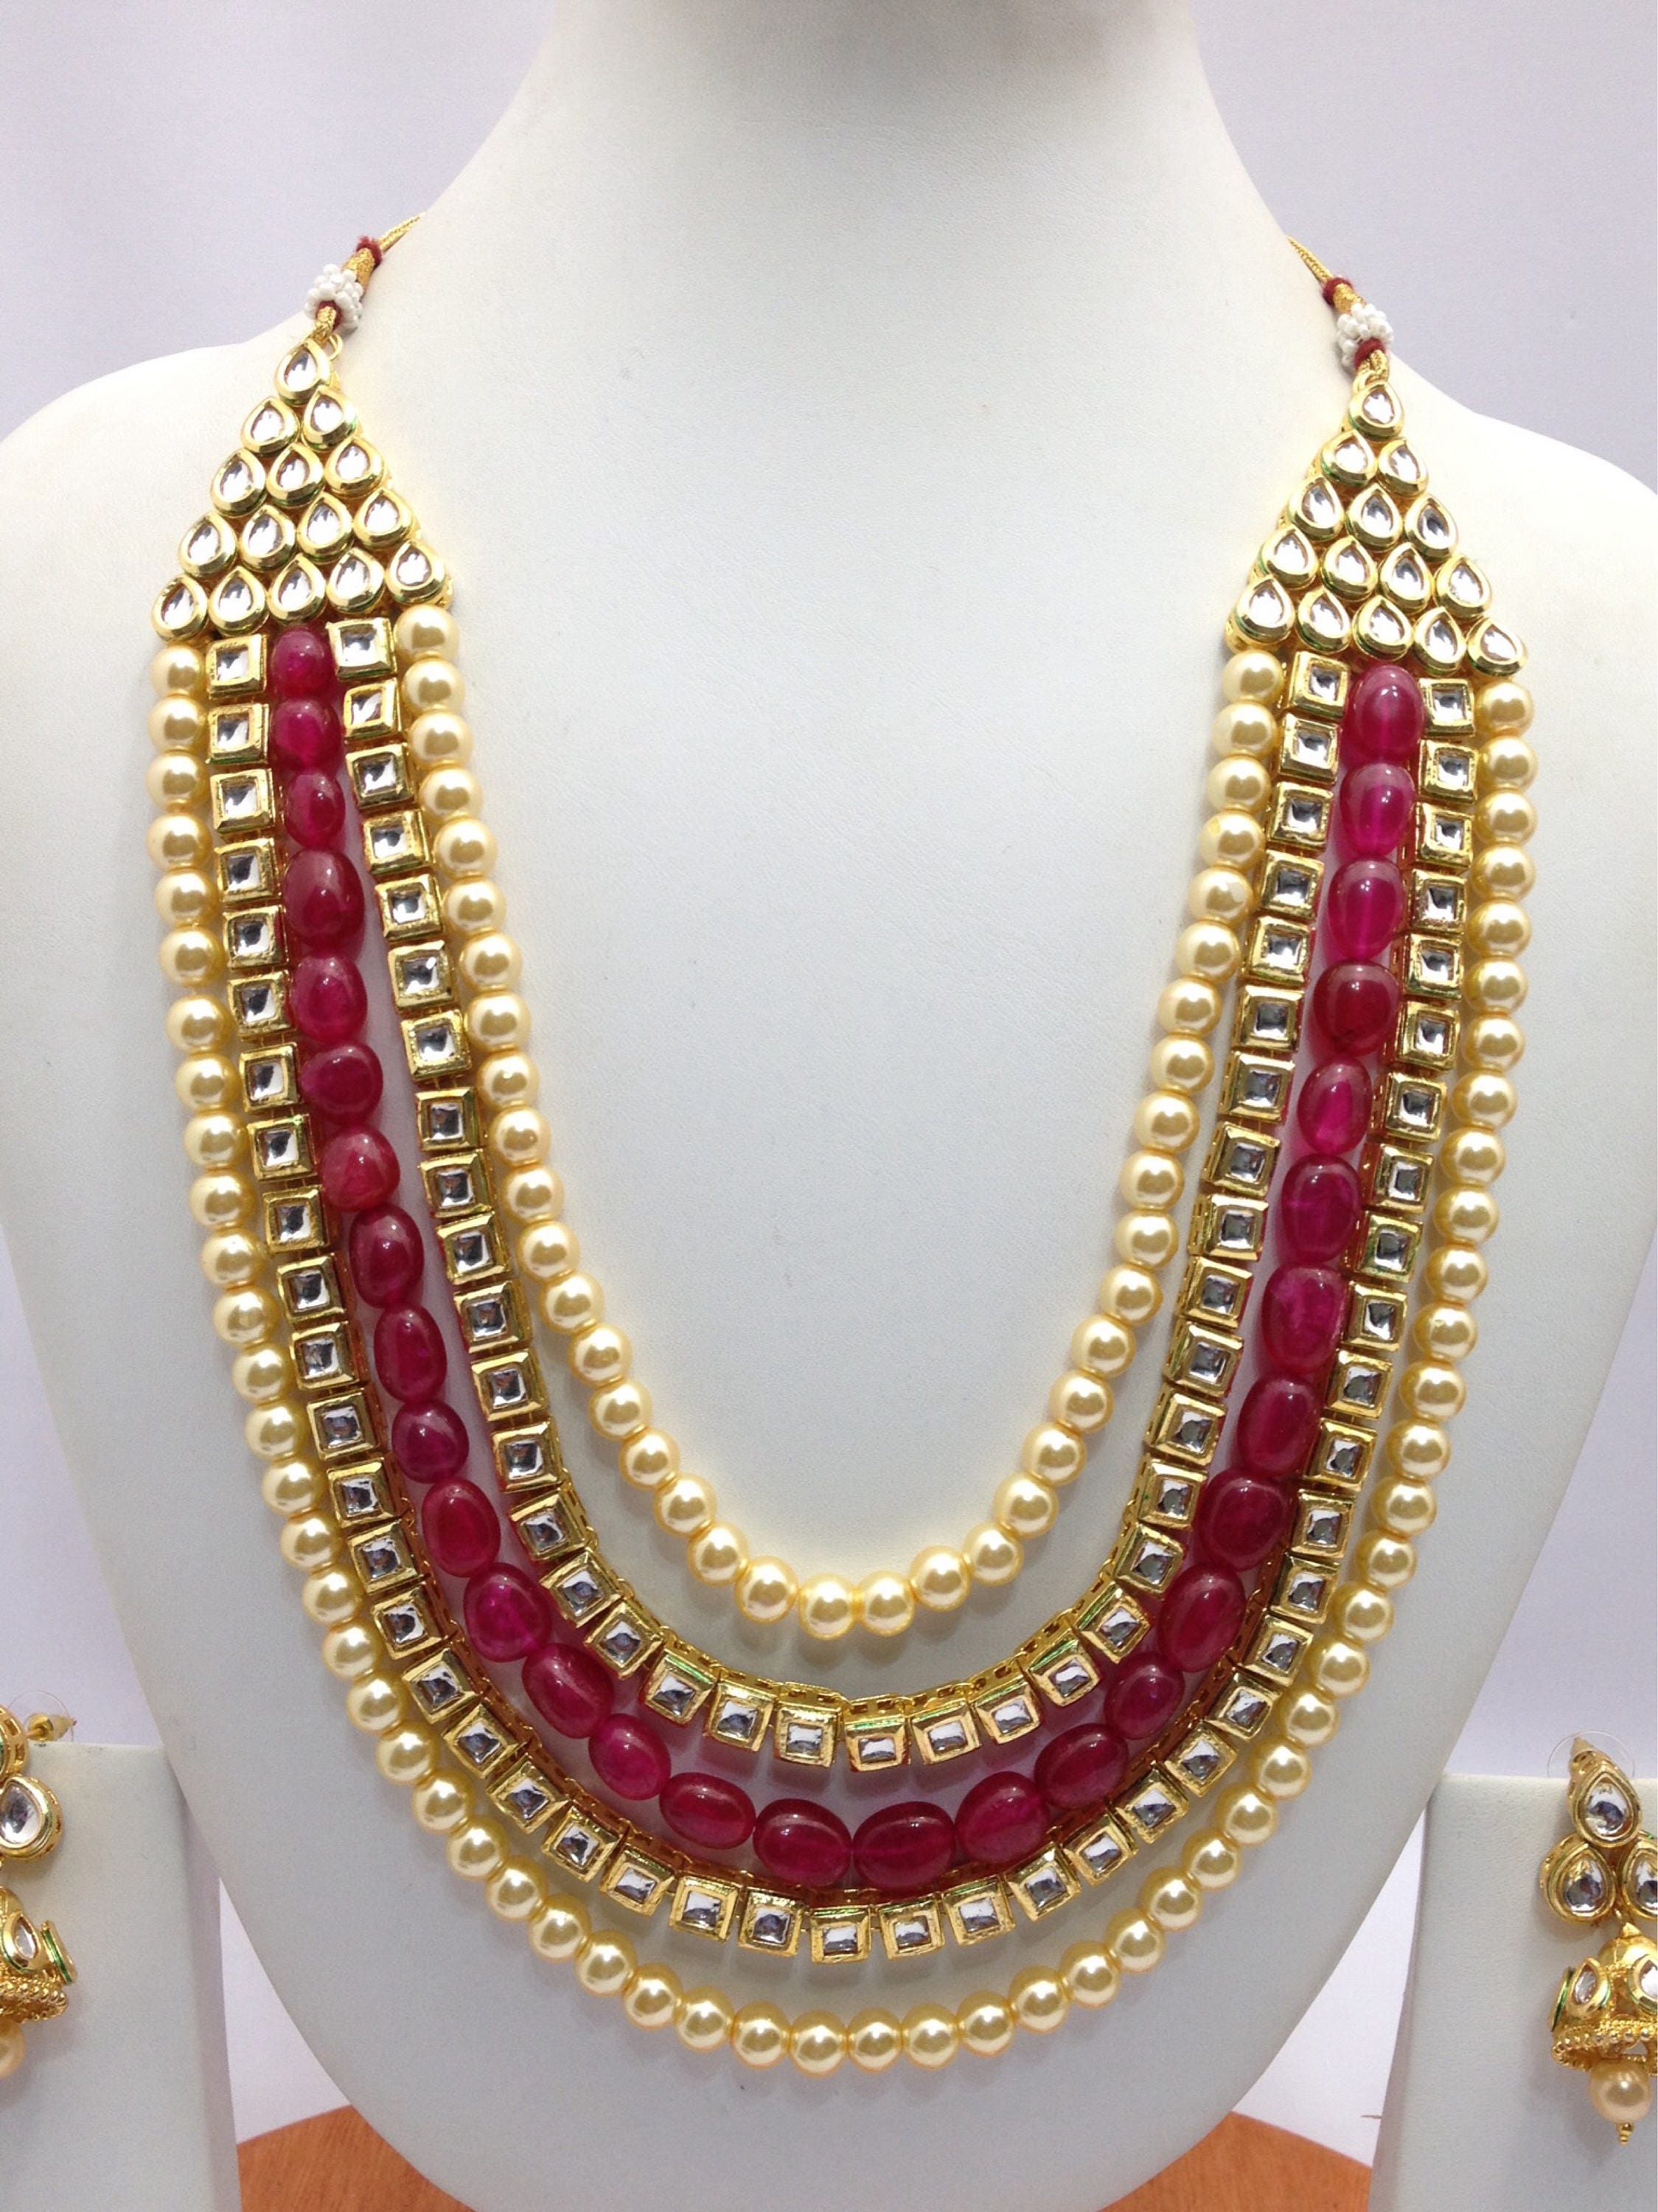 Handmade Real Kundan Necklace With Earrings Natural Ruby - Etsy UK